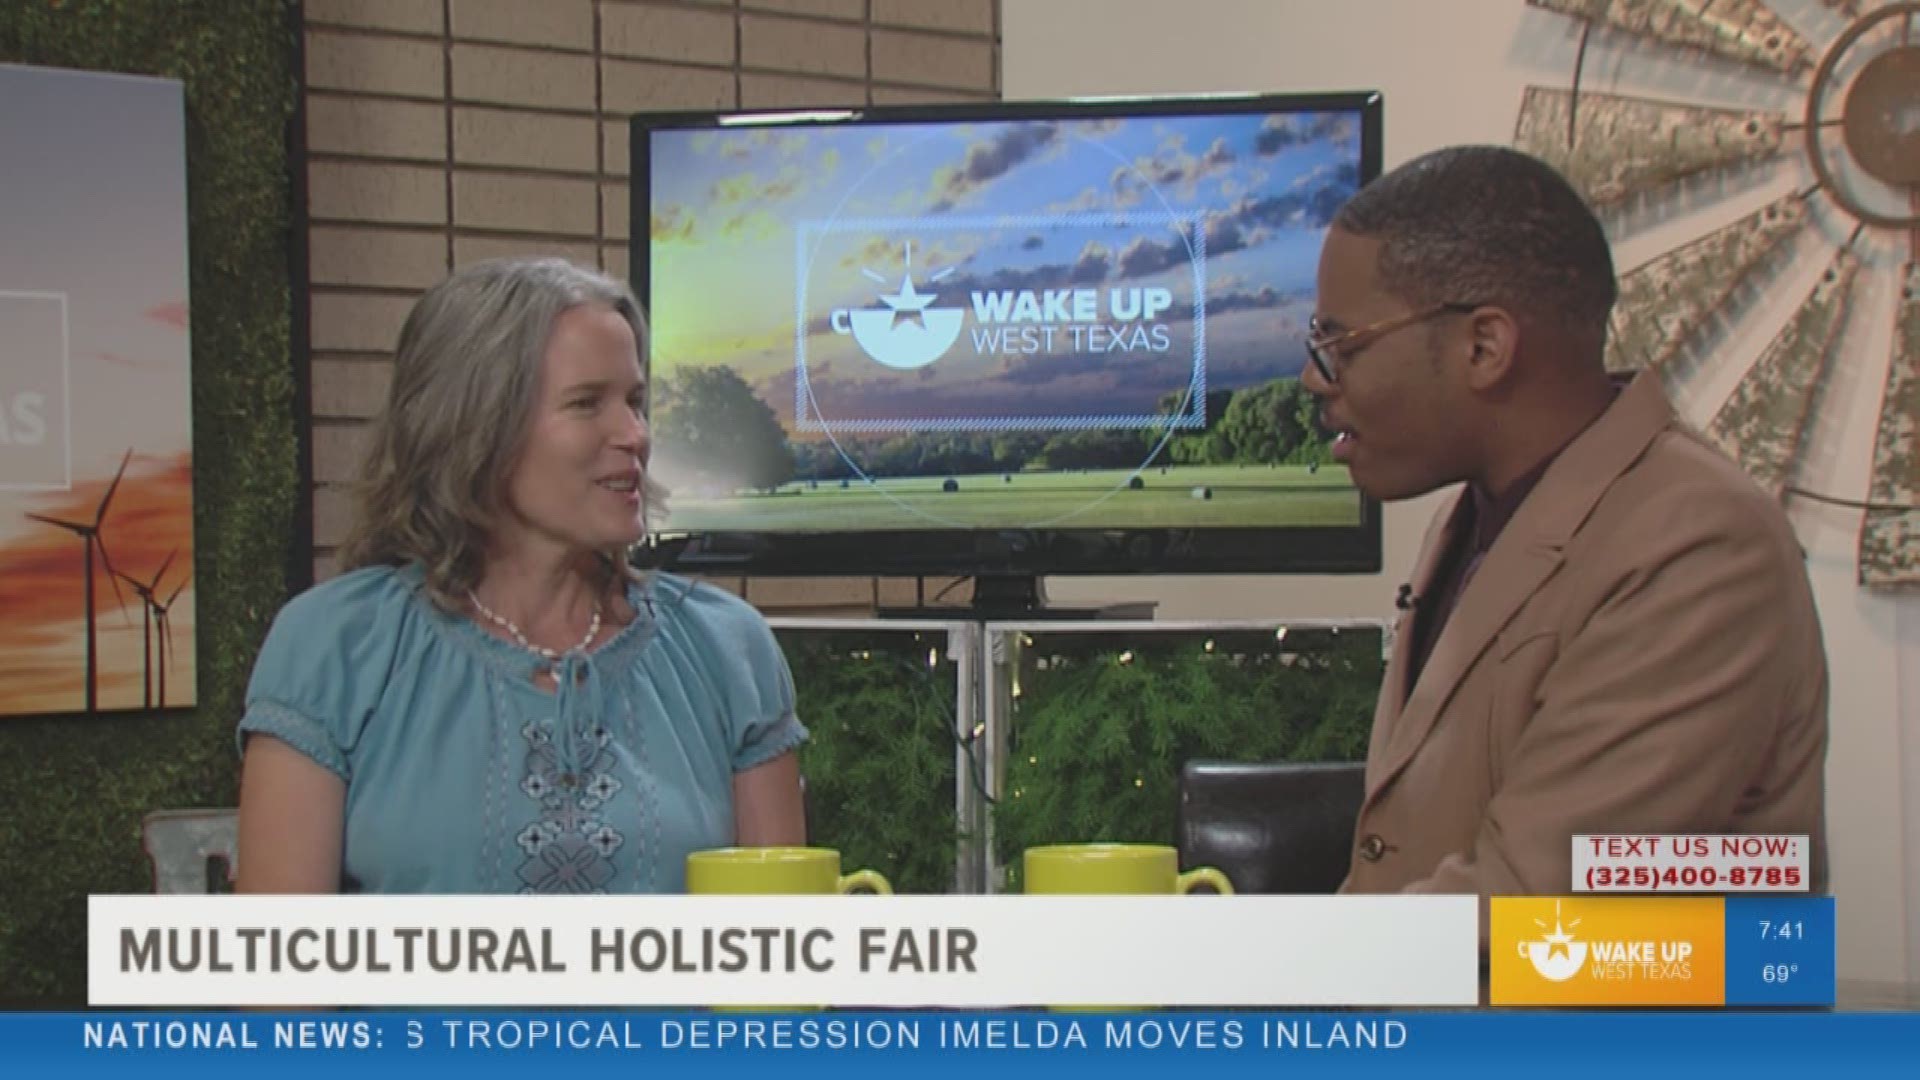 Our Malik Mingo spoke with a health and wellness expert about the multicultural holistic fair at Unity Spiritual Center of San Angelo on September 21 at 11:00 a.m.